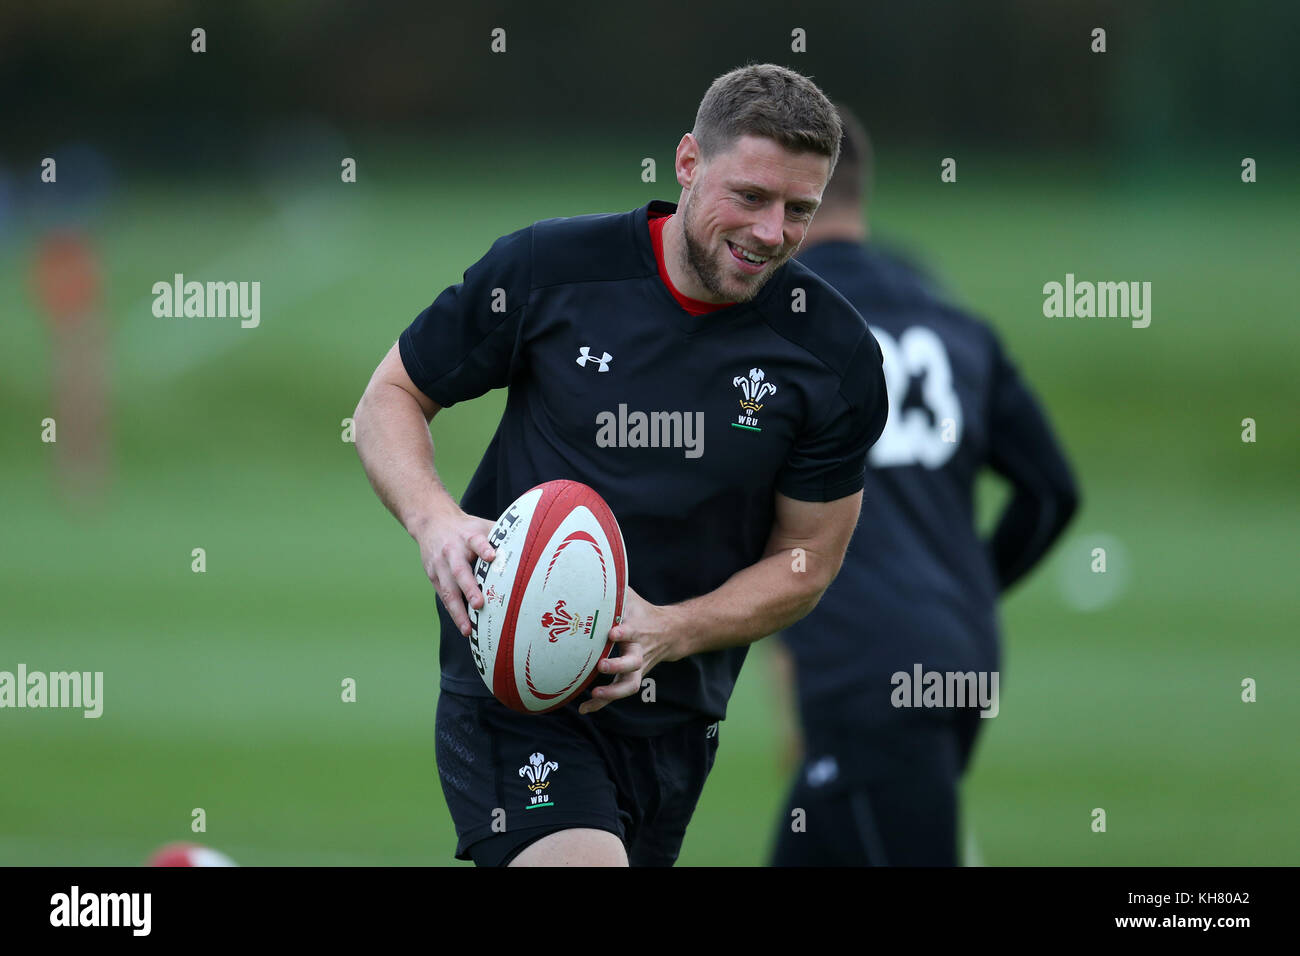 Cardiff, UK. 16th Nov, 2017. Rhys Priestland, the Wales rugby player in action during the Wales rugby team training session at the Vale Resort Hotel in Hensol, near Cardiff , South Wales on Thursday  16th November 2017.  the team are preparing for their Autumn International series match against Georgia this weekend.   pic by Andrew Orchard/Alamy Live News Stock Photo